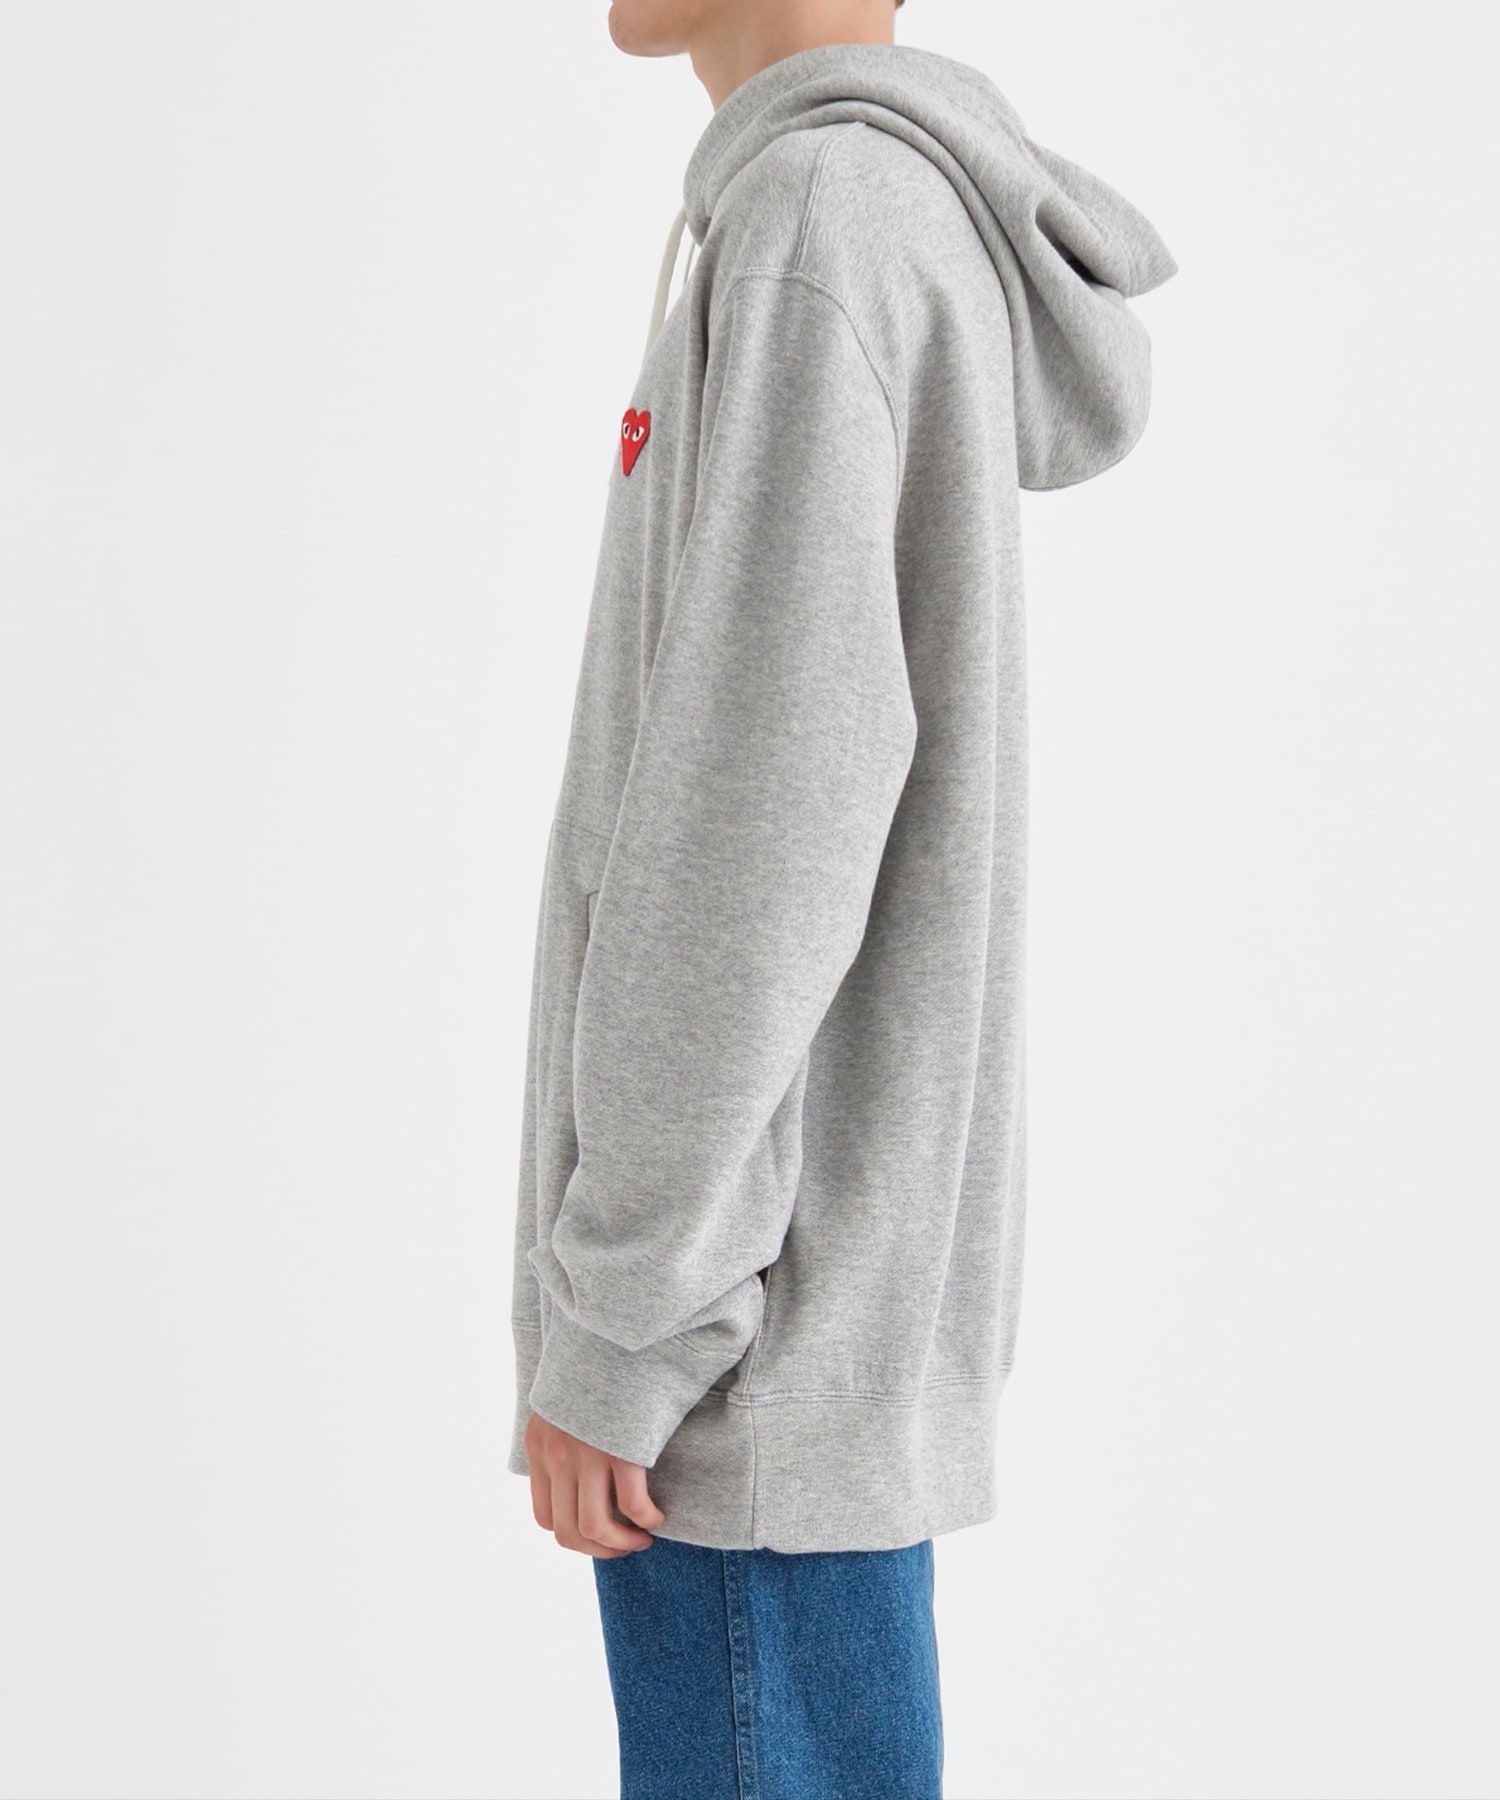 AZ-T170-051 PLAY HOODED SWEATSHIRT RED HEART PLAY COMME des GARCONS